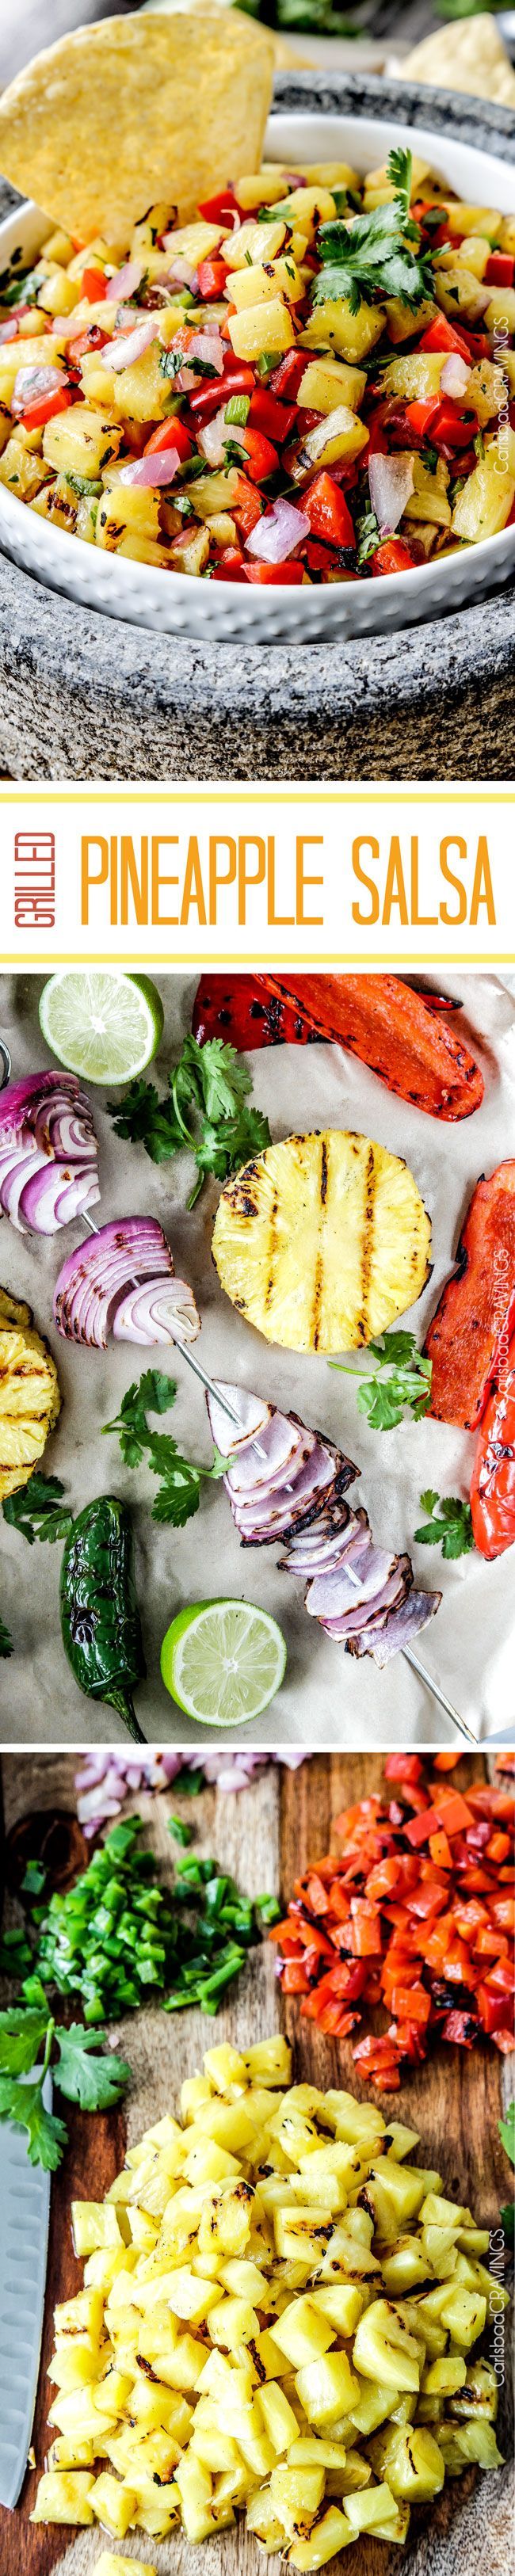 Sweet and smoky Grilled Pineapple salsa with not only grilled pineapple but GRILLED red bell peppers, red onions AND jalapeno!